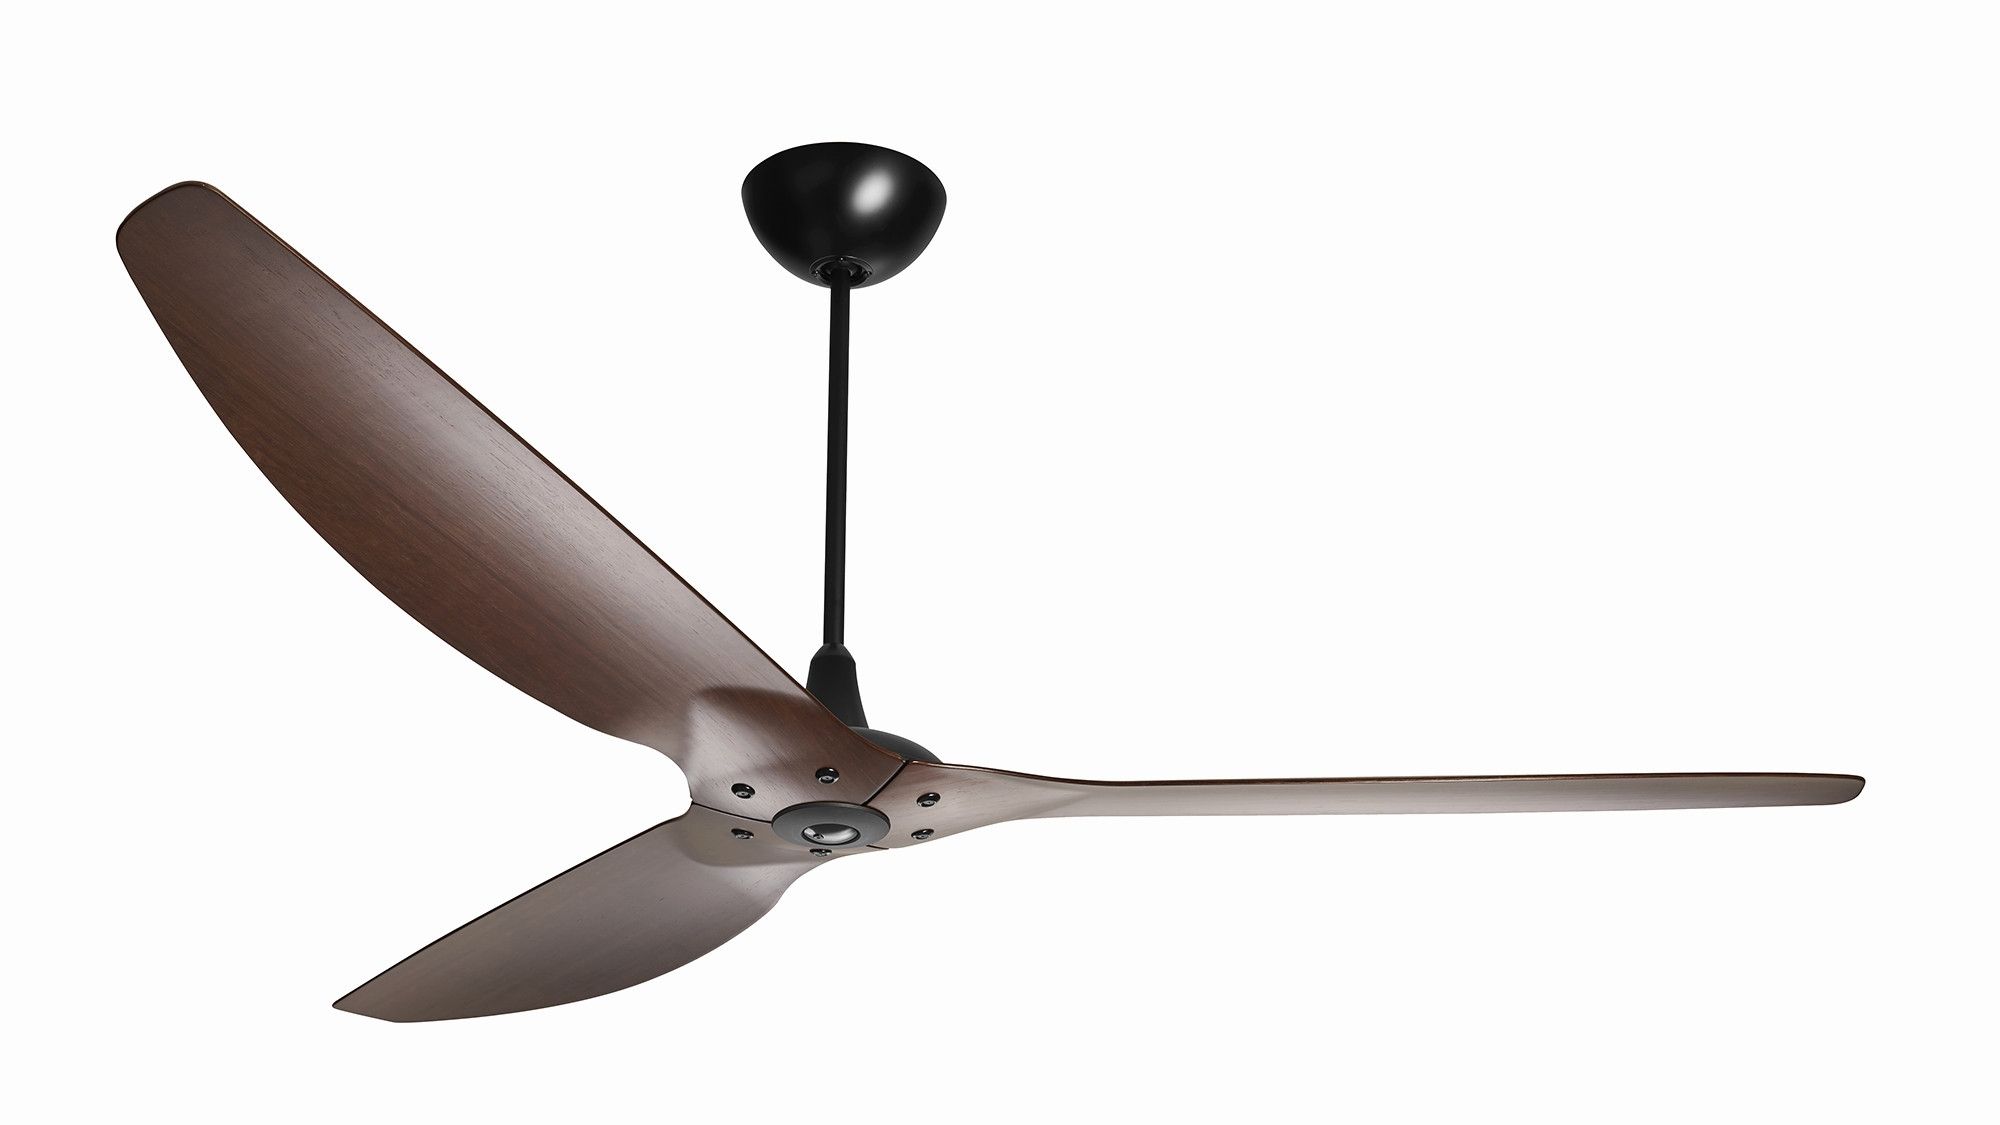 Ceiling Fan Cost Fan On The Ceiling Outdoor Ceiling Fans With Led With Regard To Most Up To Date Outdoor Ceiling Fans For 7 Foot Ceilings (View 15 of 20)